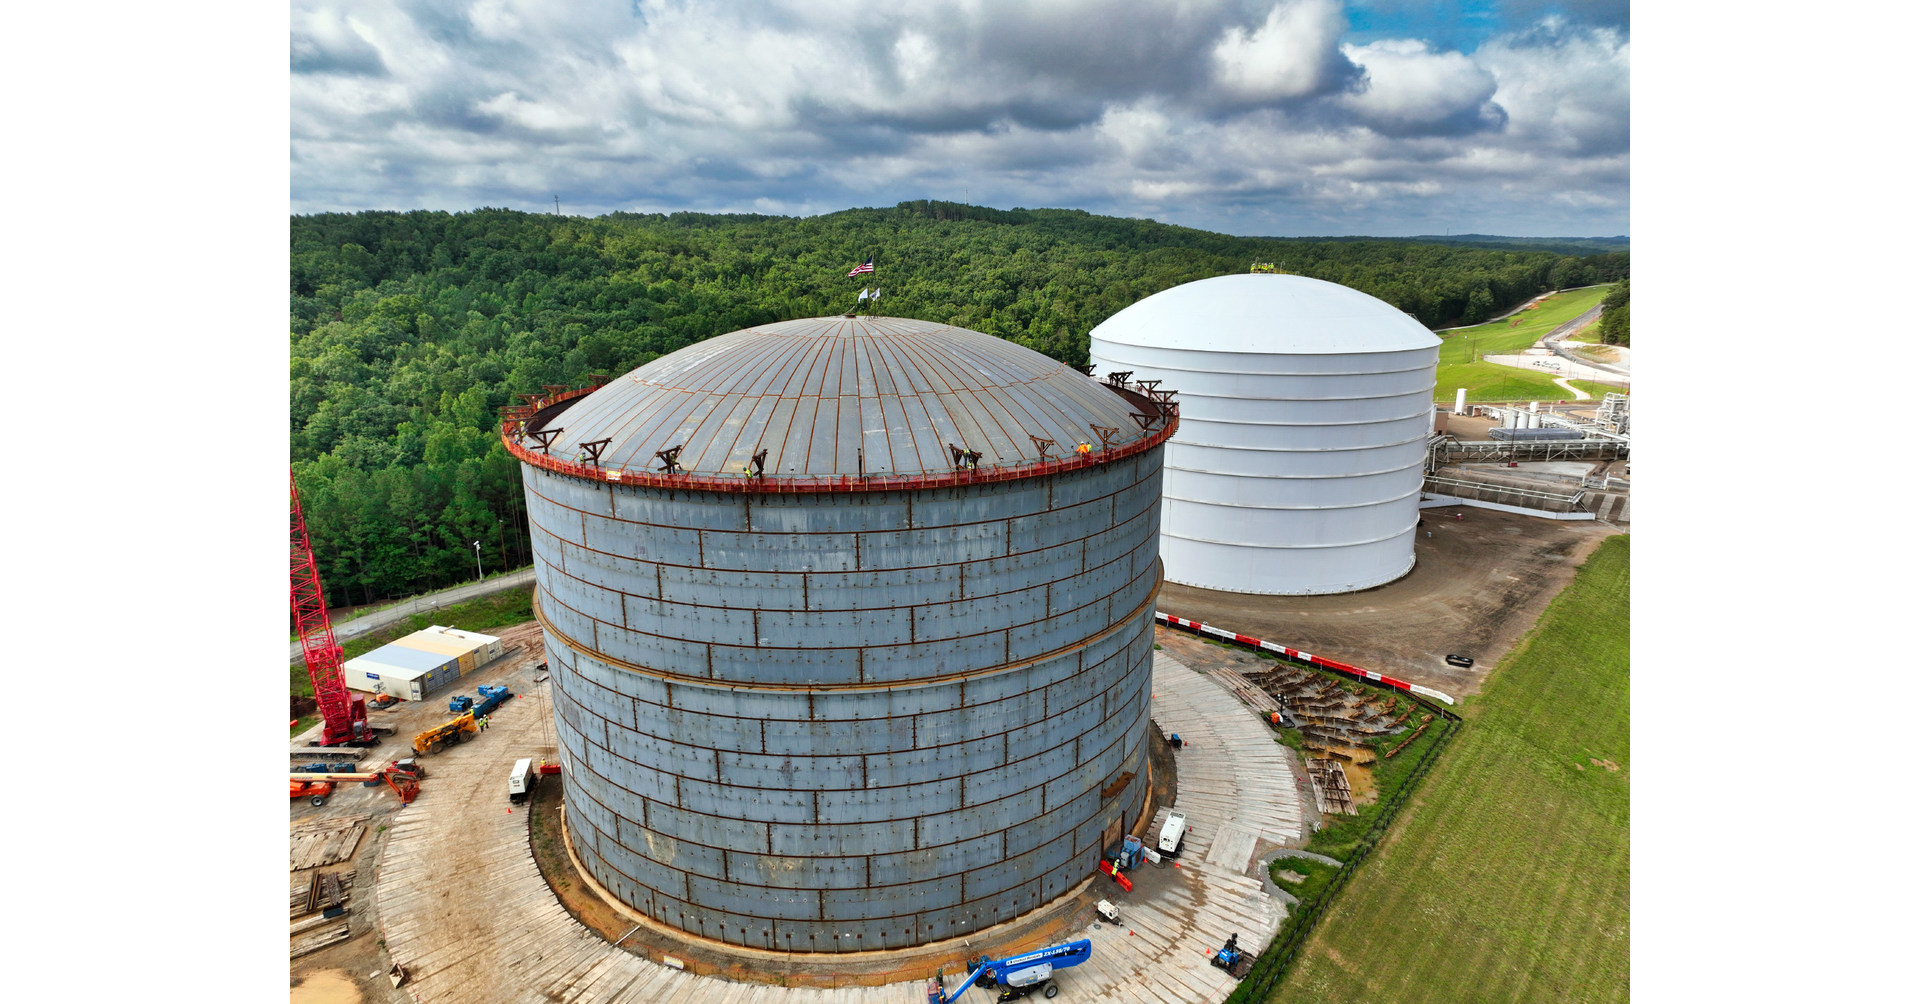 atlanta-gas-light-announces-roof-placement-for-second-lng-storage